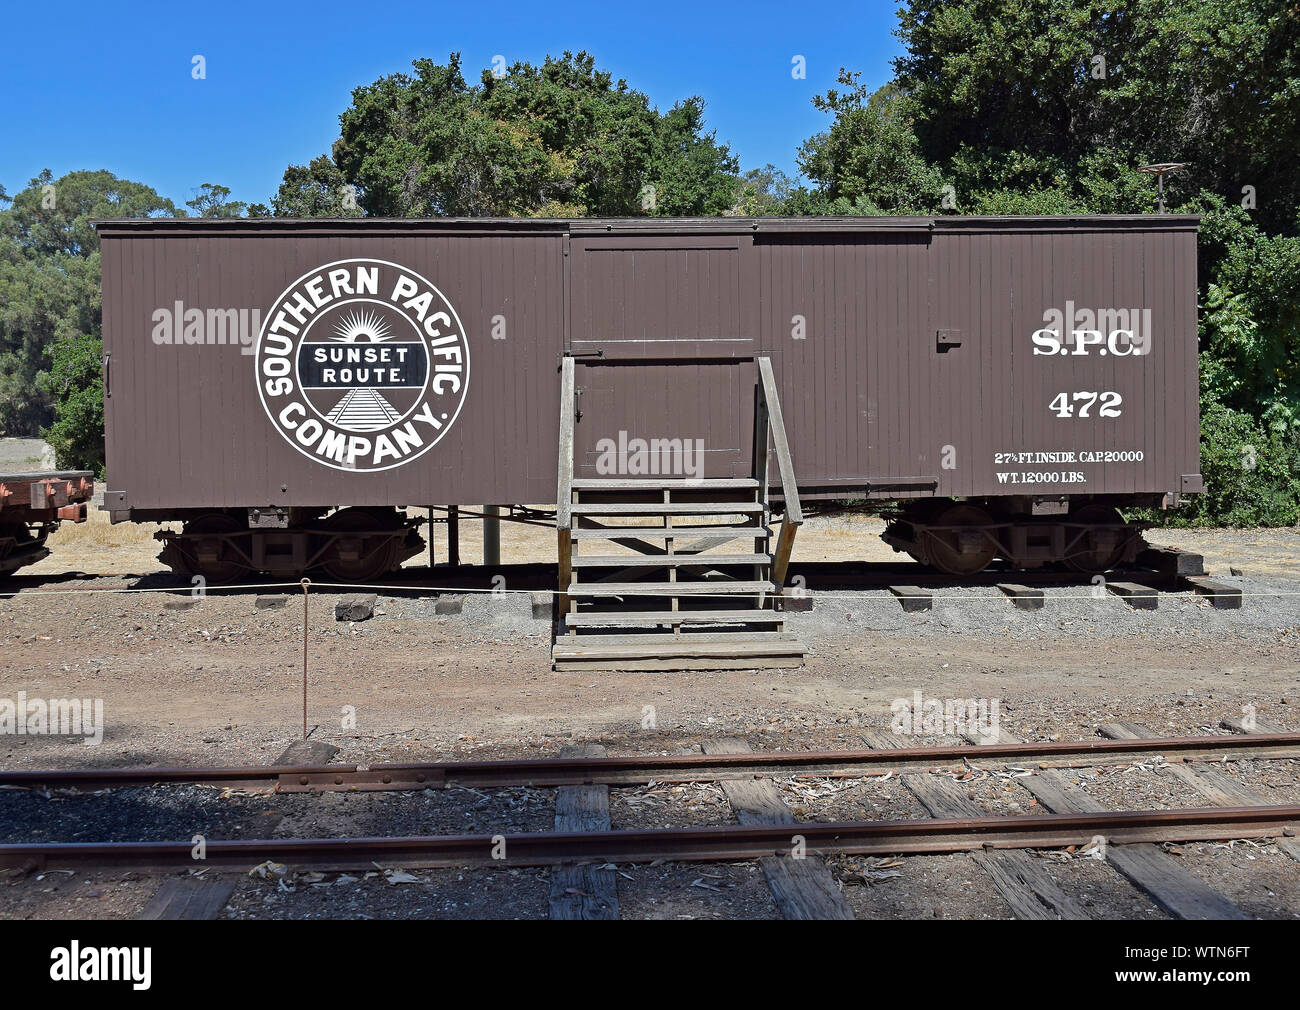 Southern Pacific company box car at  Ardenwood Historic Farm, Fremont, California Stock Photo